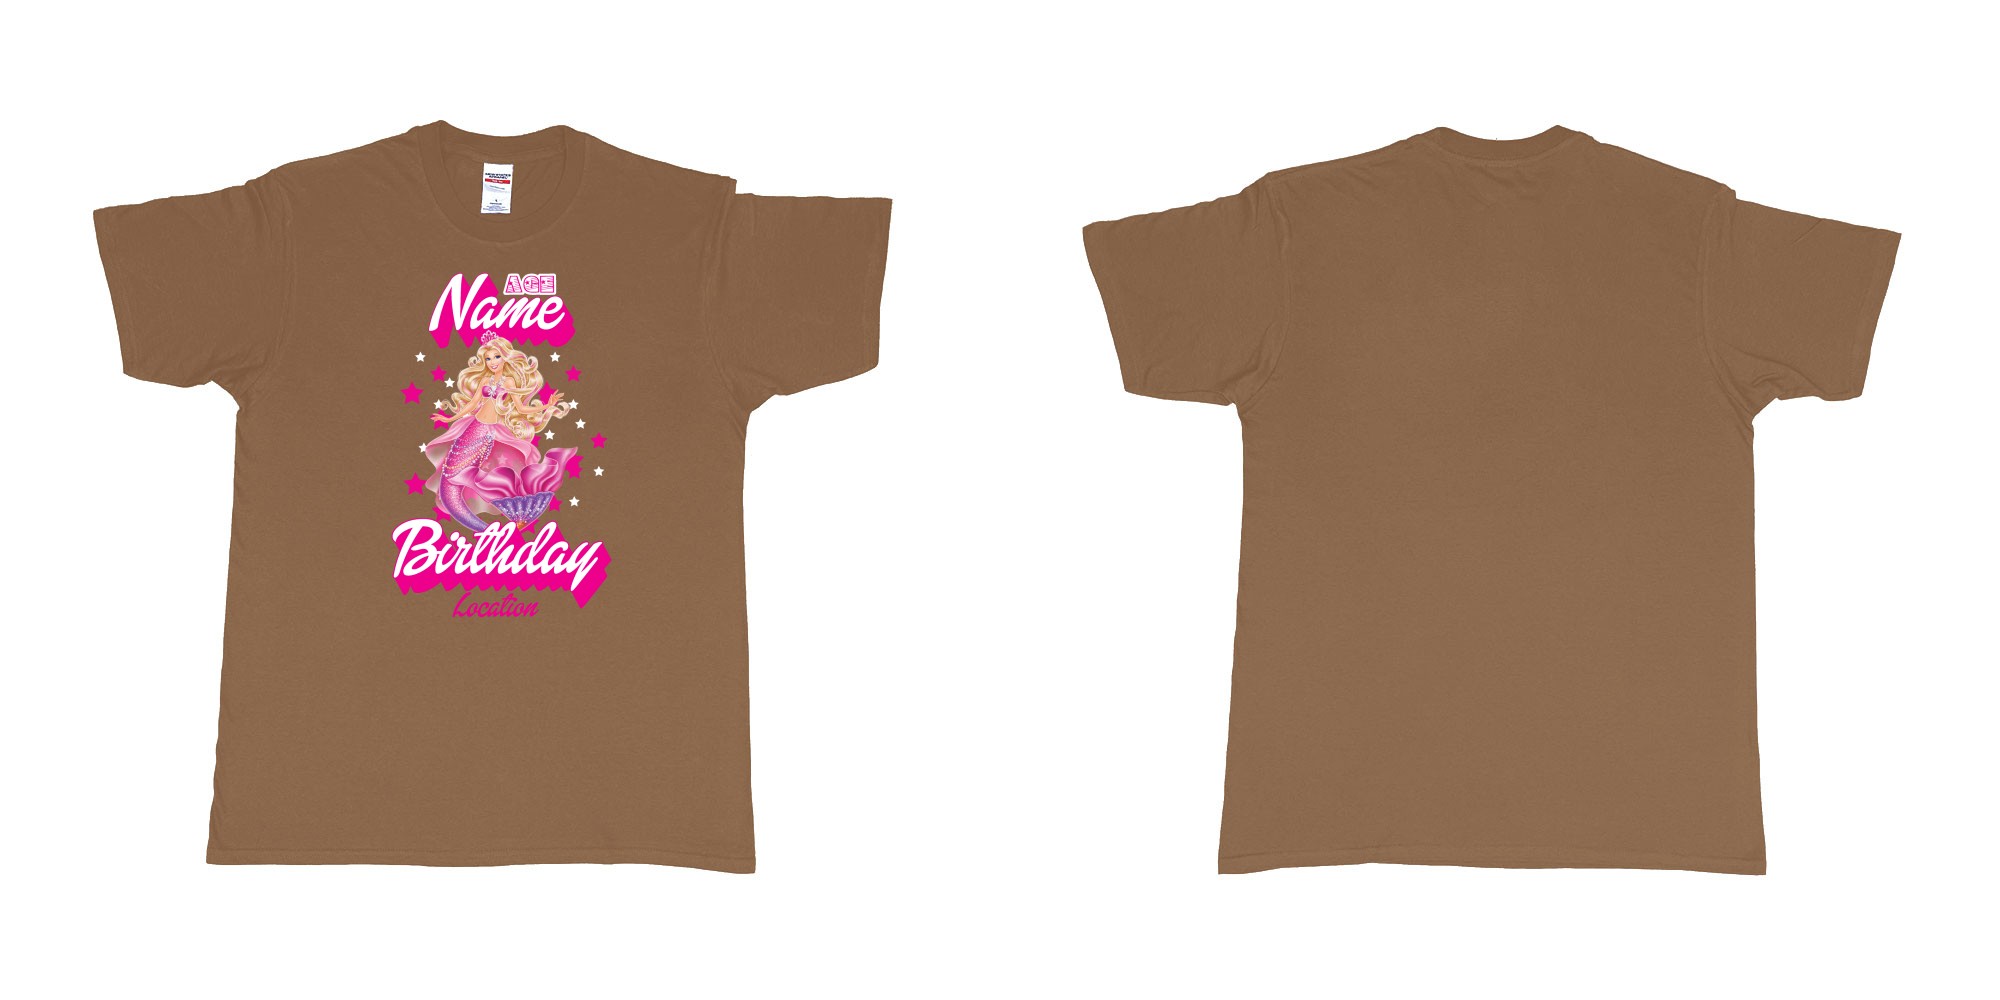 Custom tshirt design barbie mermaid custom name birthday in fabric color chestnut choice your own text made in Bali by The Pirate Way